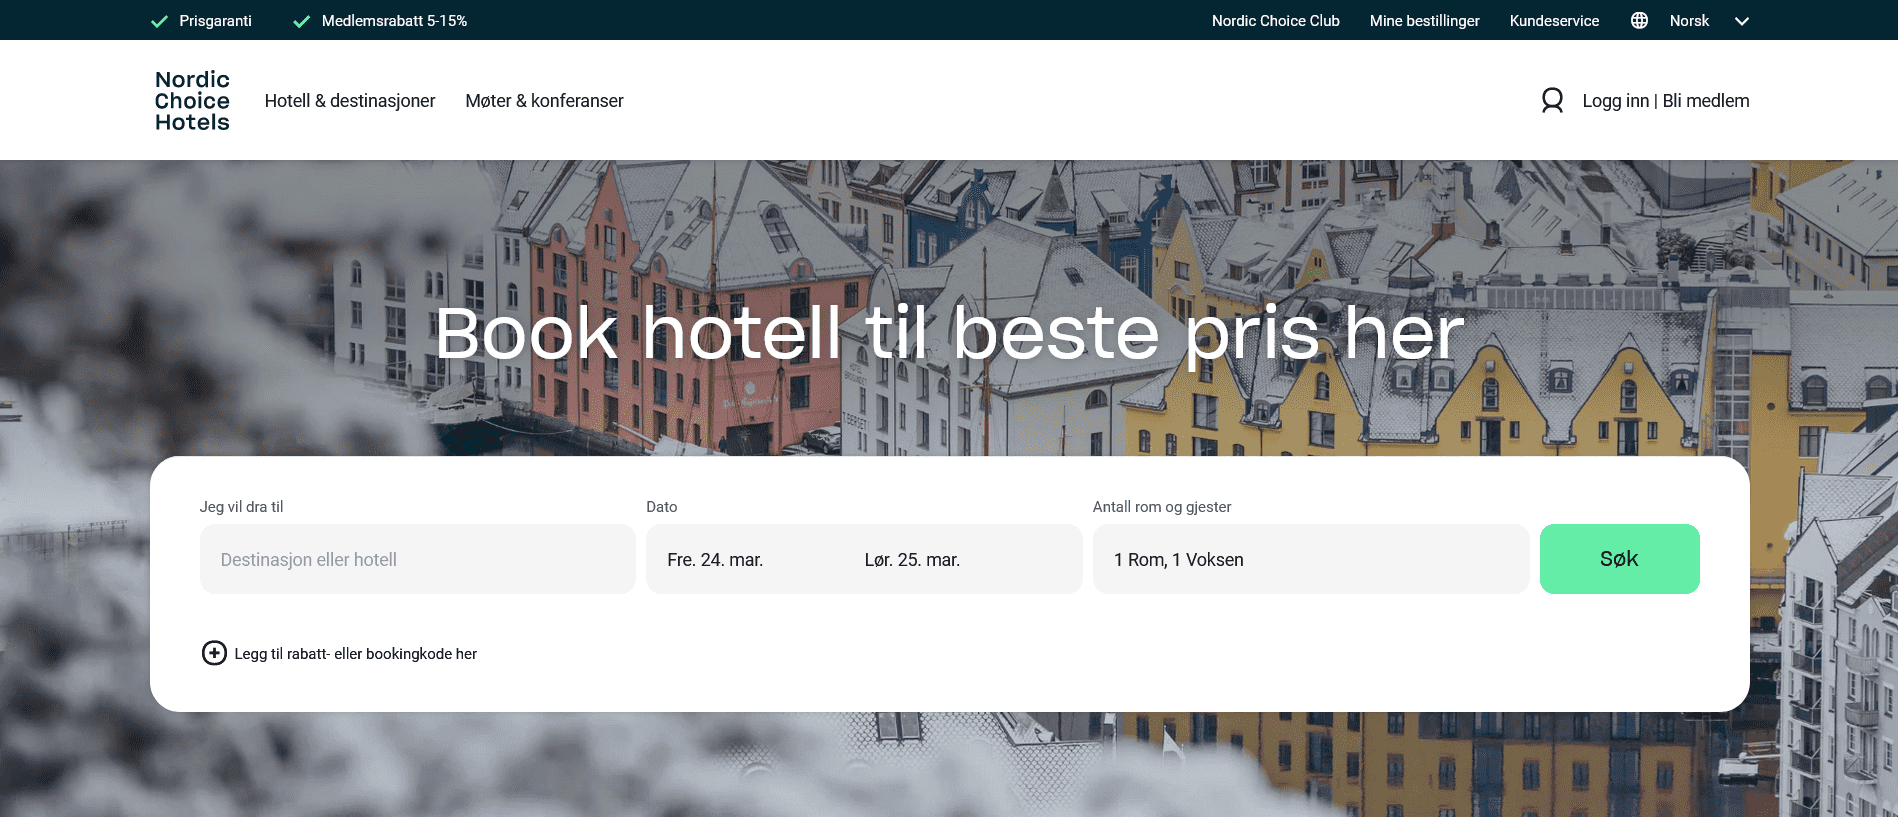 Reiseliv - Choice Hotels